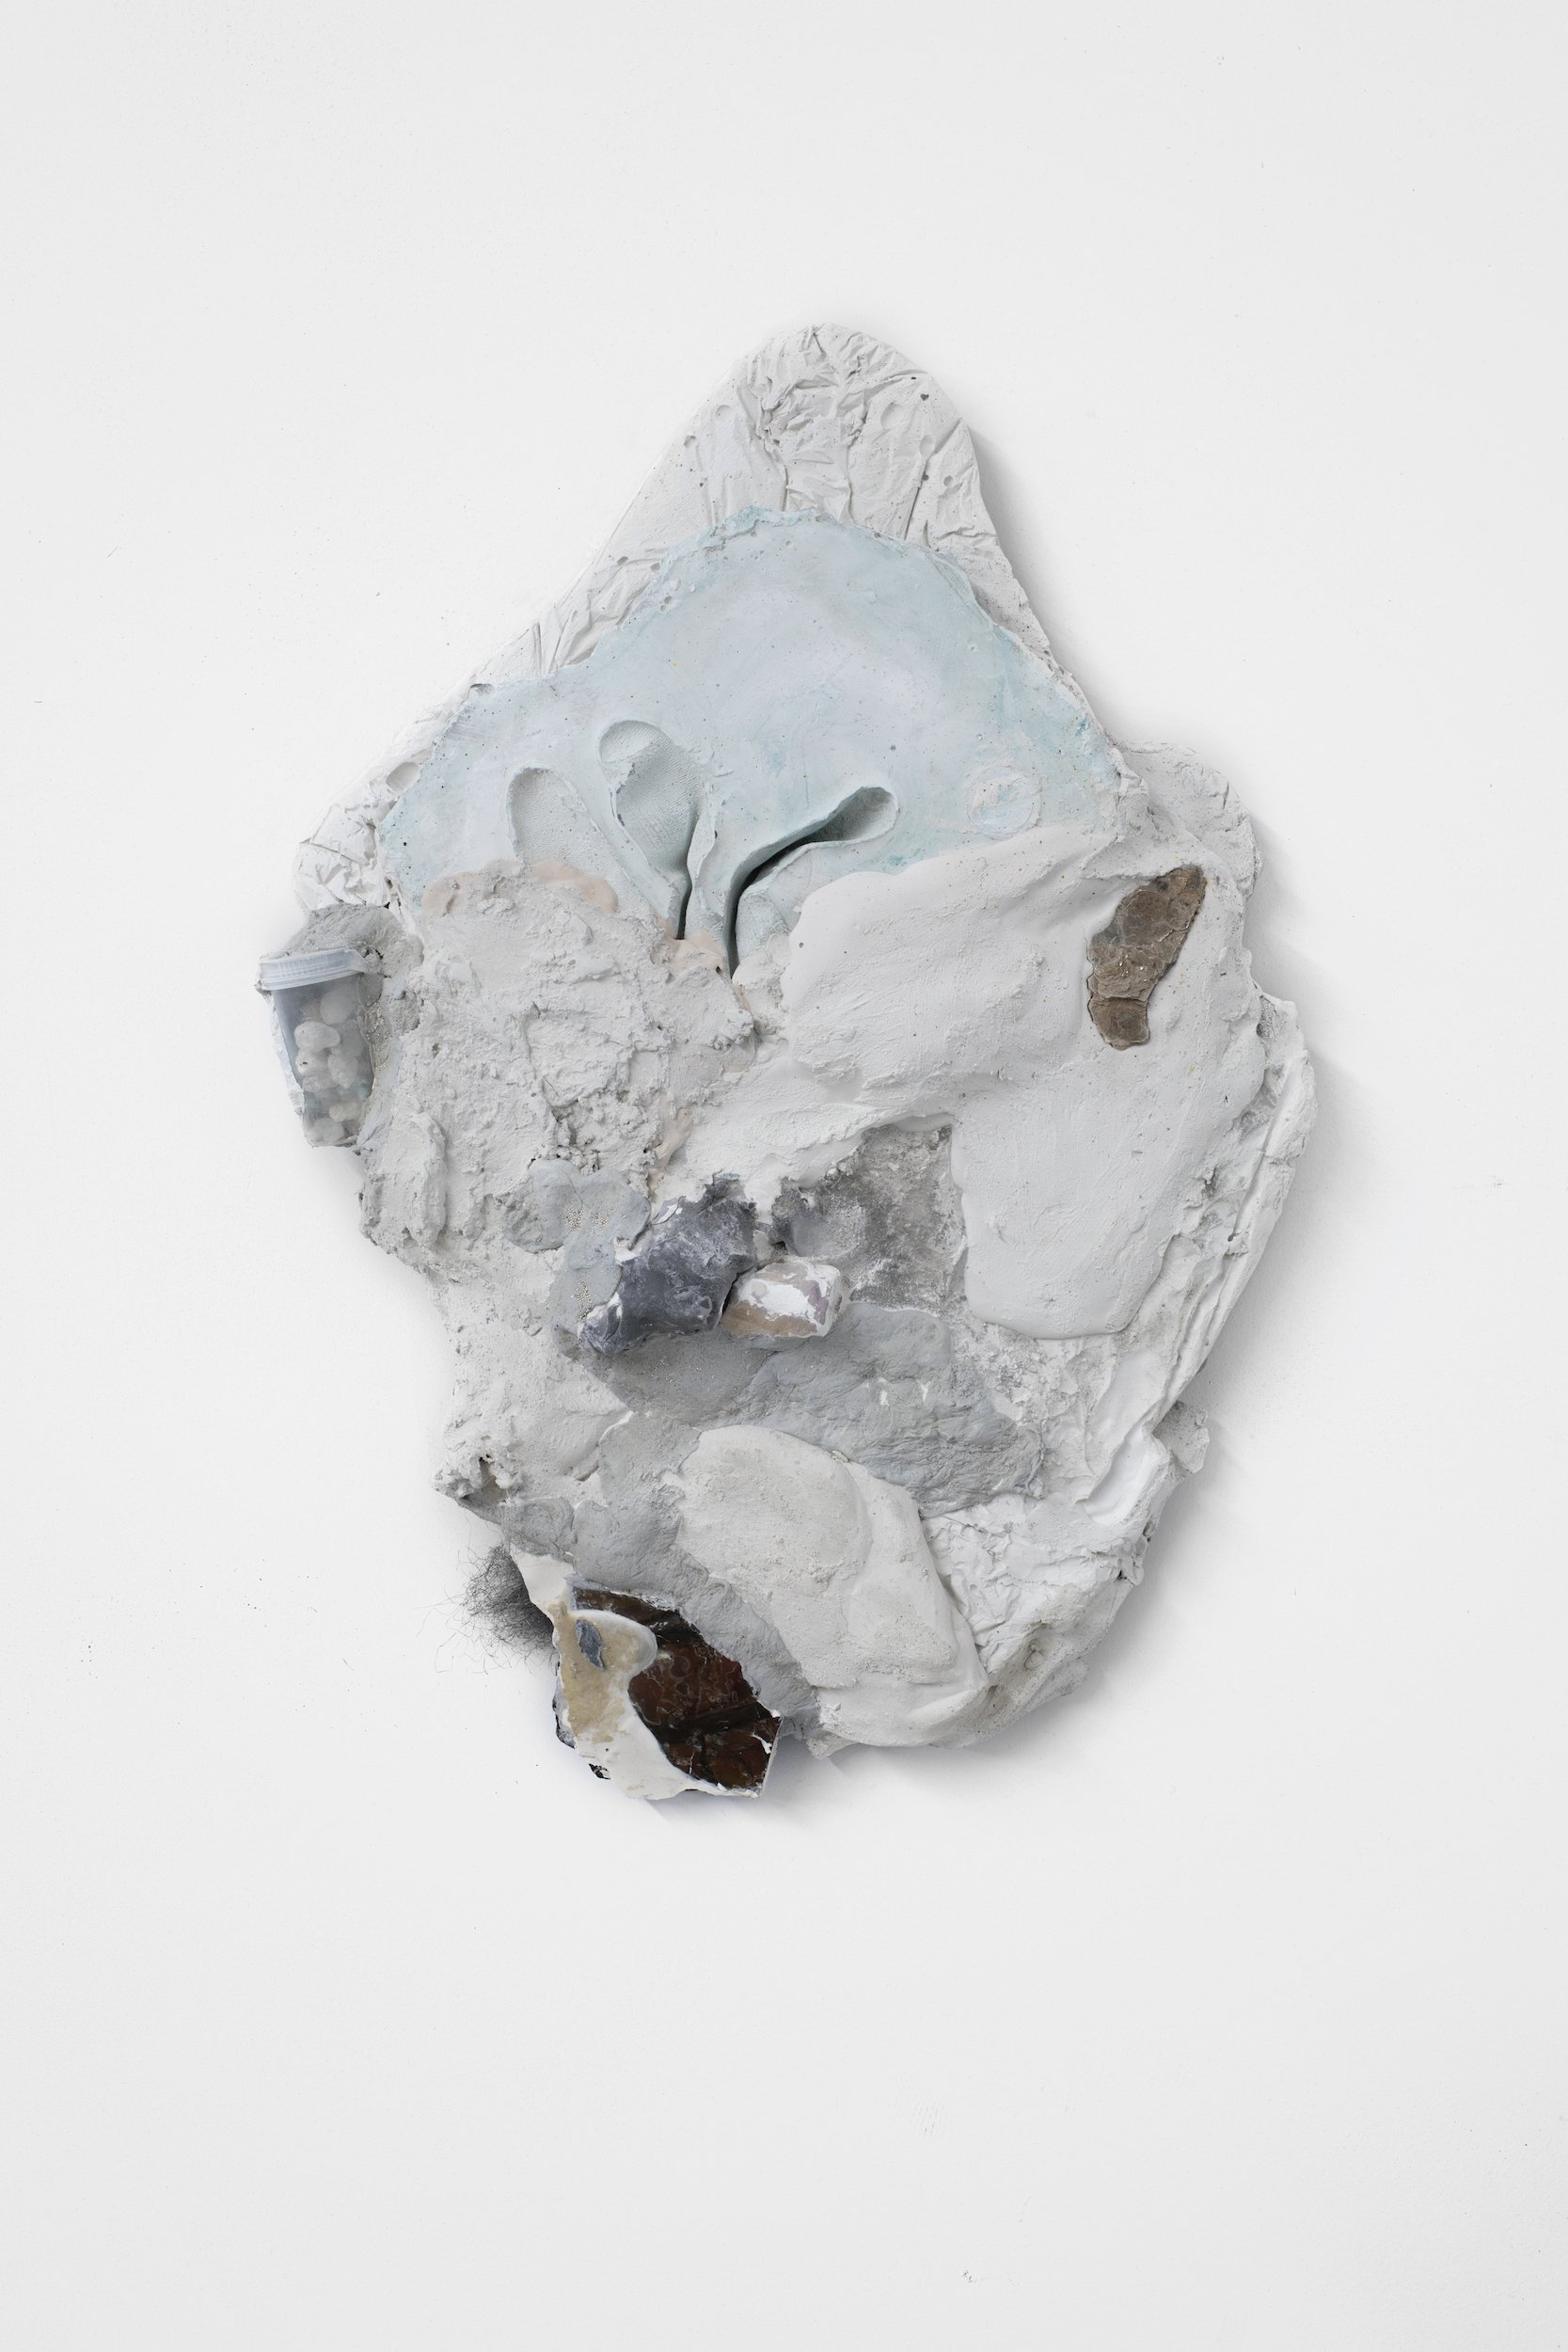  Laur P,  At last, our reshaped contours will be welcome , 2024, Plaster cast of gloves, rocks from childhood collection (muscovite mica, phlogopite mica), unfired clay, dry pigment, beads, steel wool, concrete sealant, pill bottle, cigarette butts, 